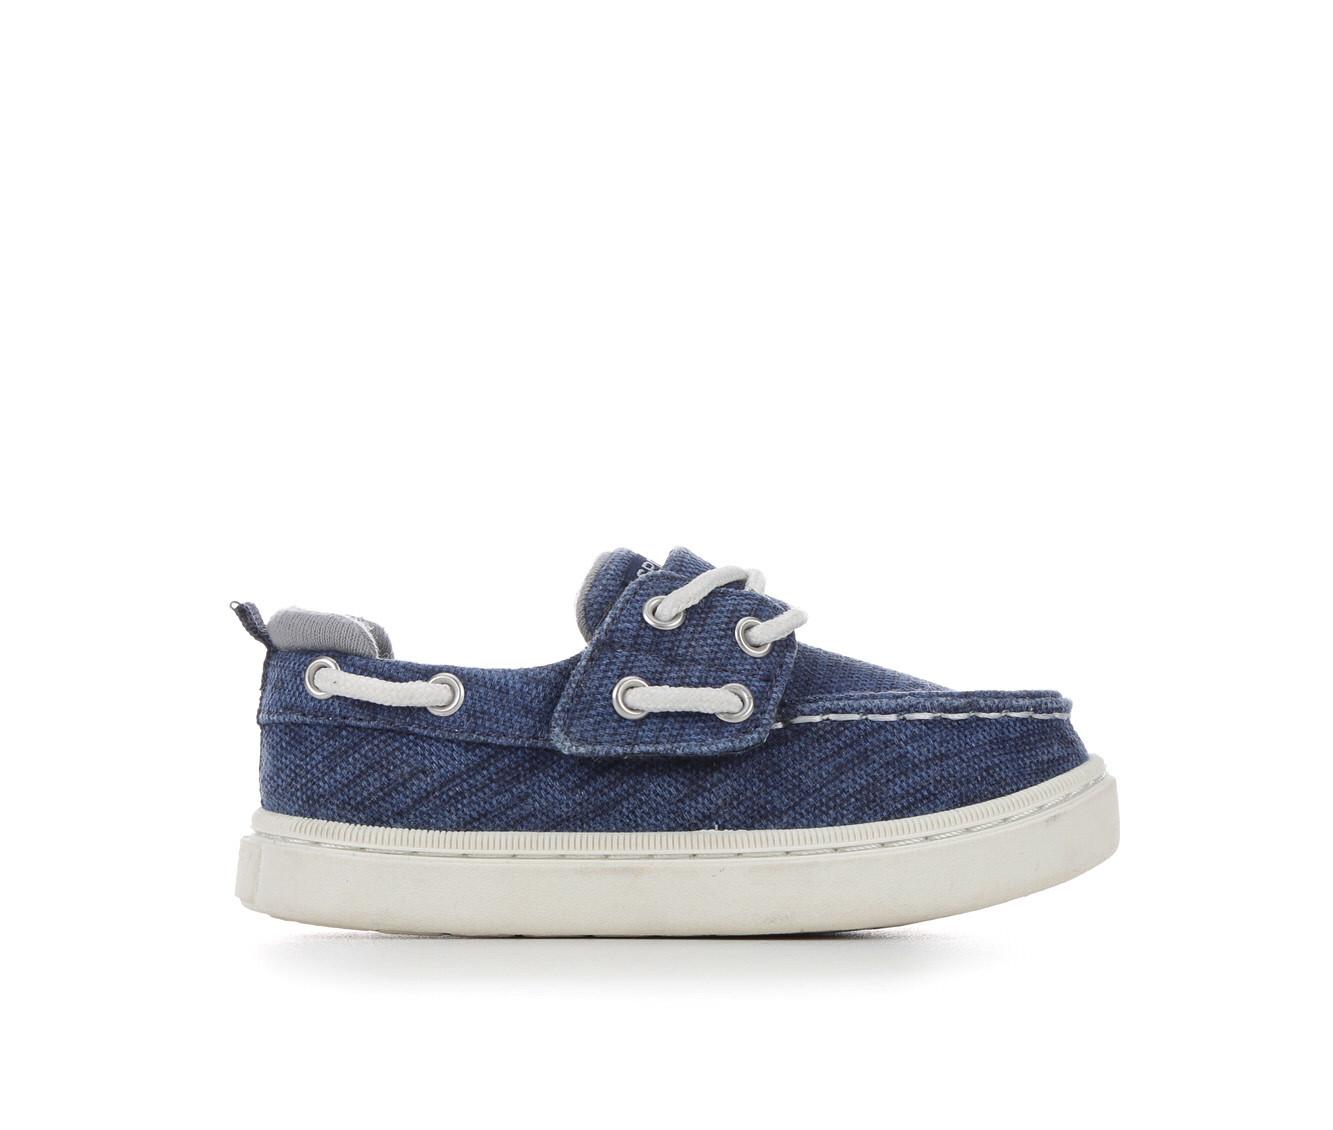 Boys' Sperry Toddler & Little Kid Sea Ketch Boat Shoes